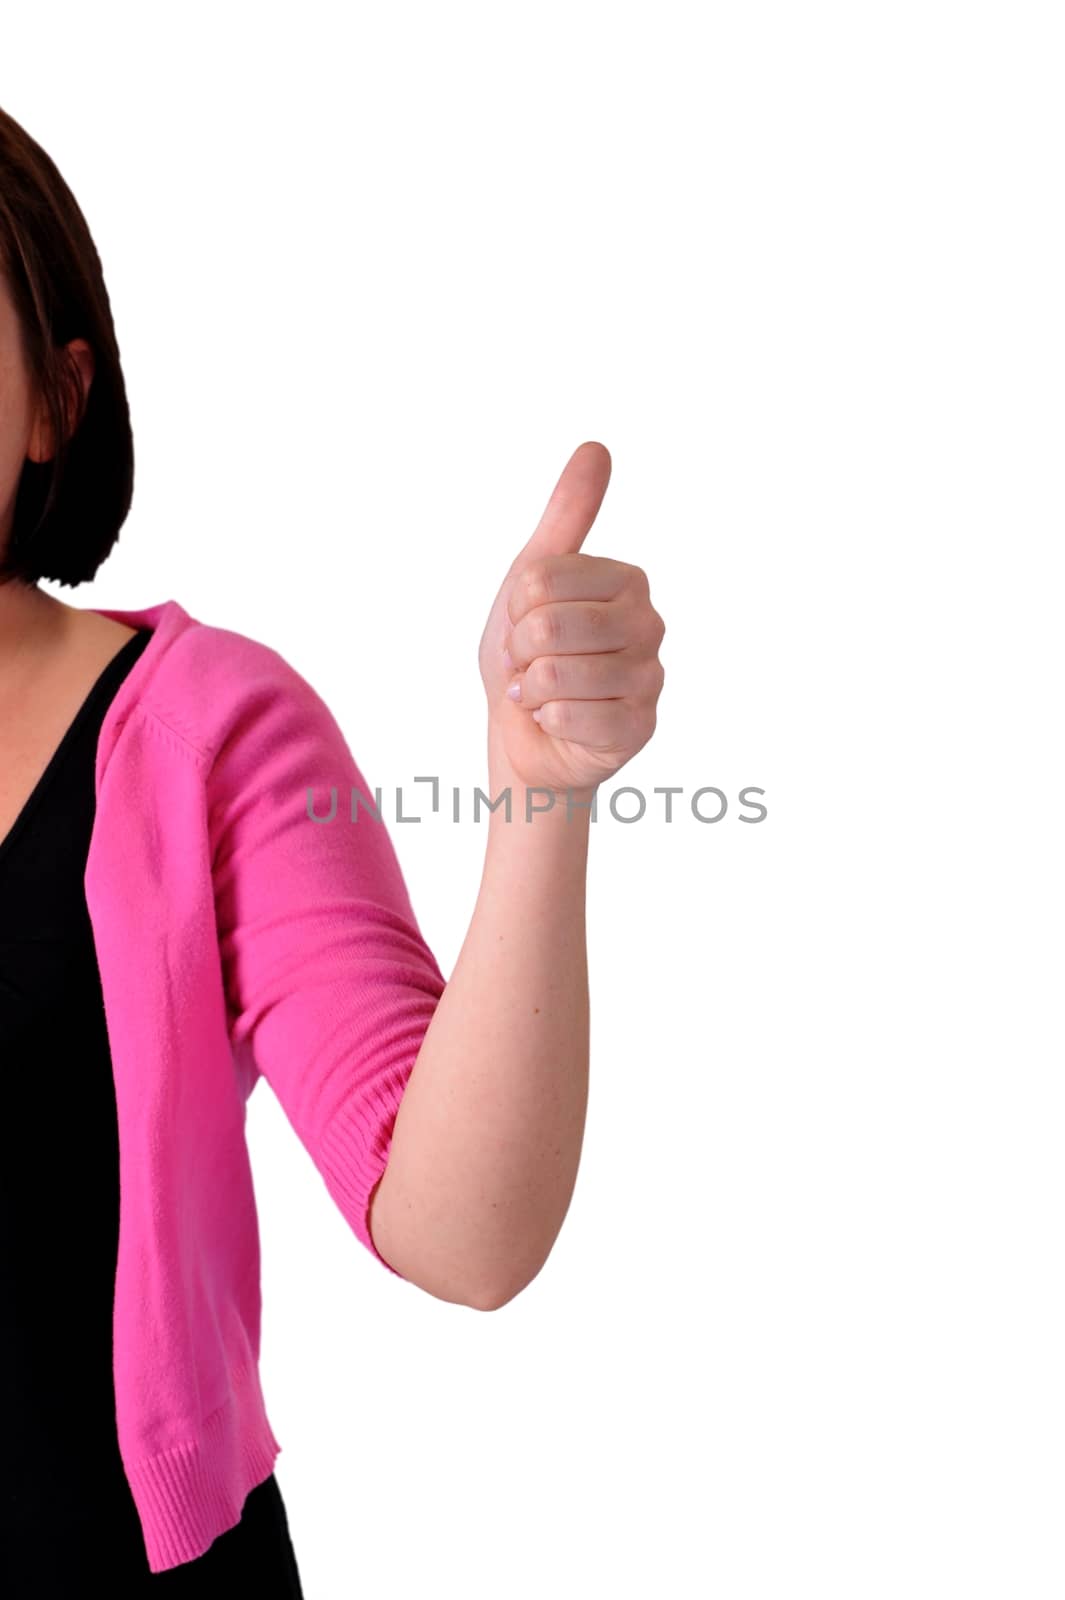 Sounds Good. Clipped Young Female with Hand Up. White Background